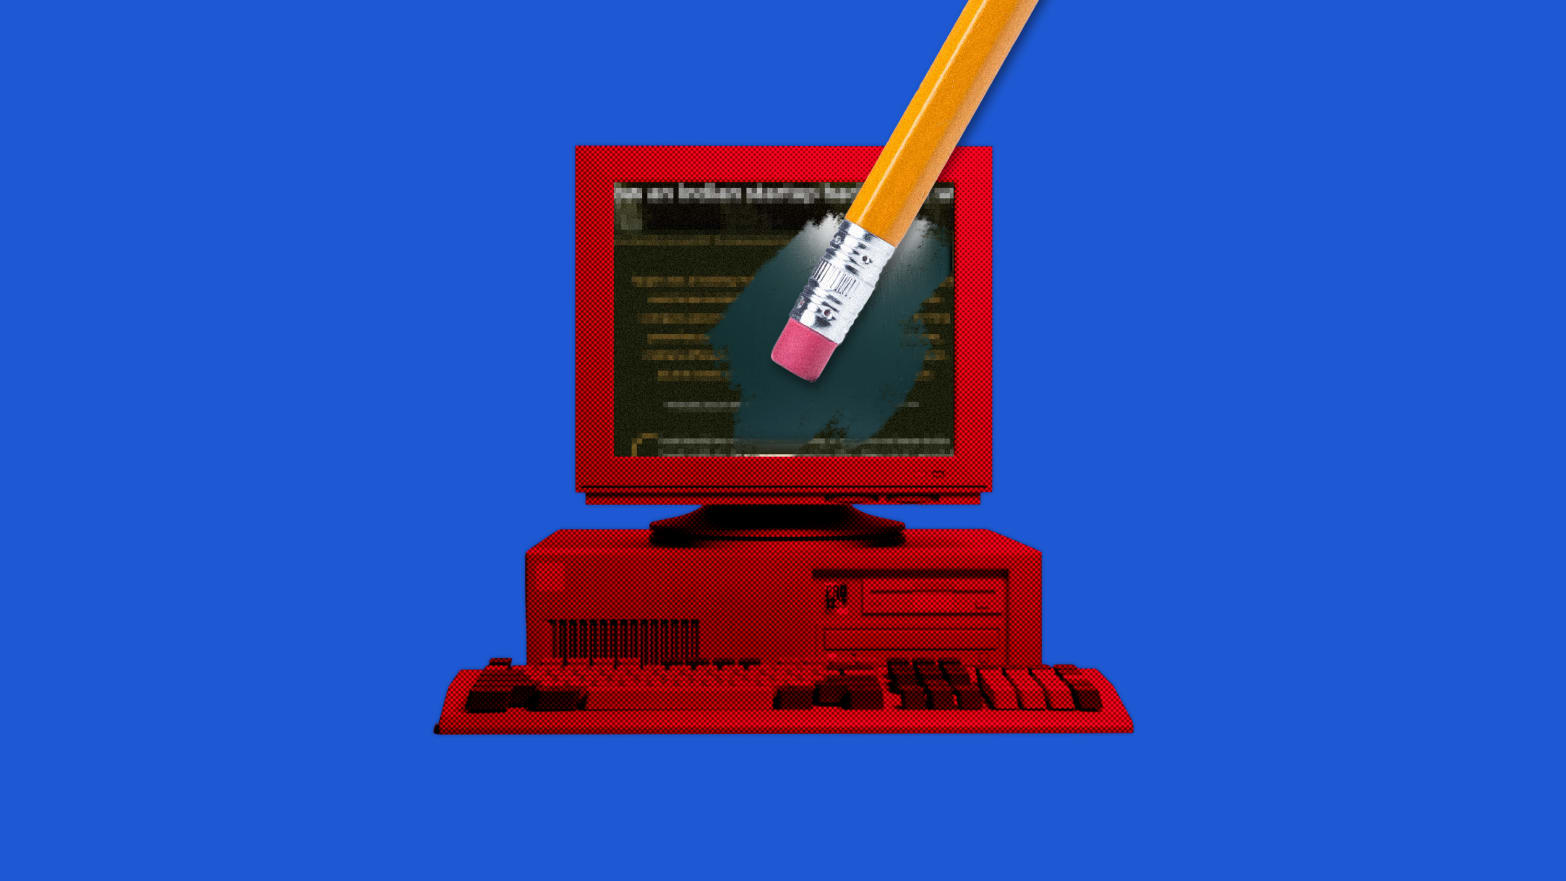 A photo illustration of a red computer being erased.